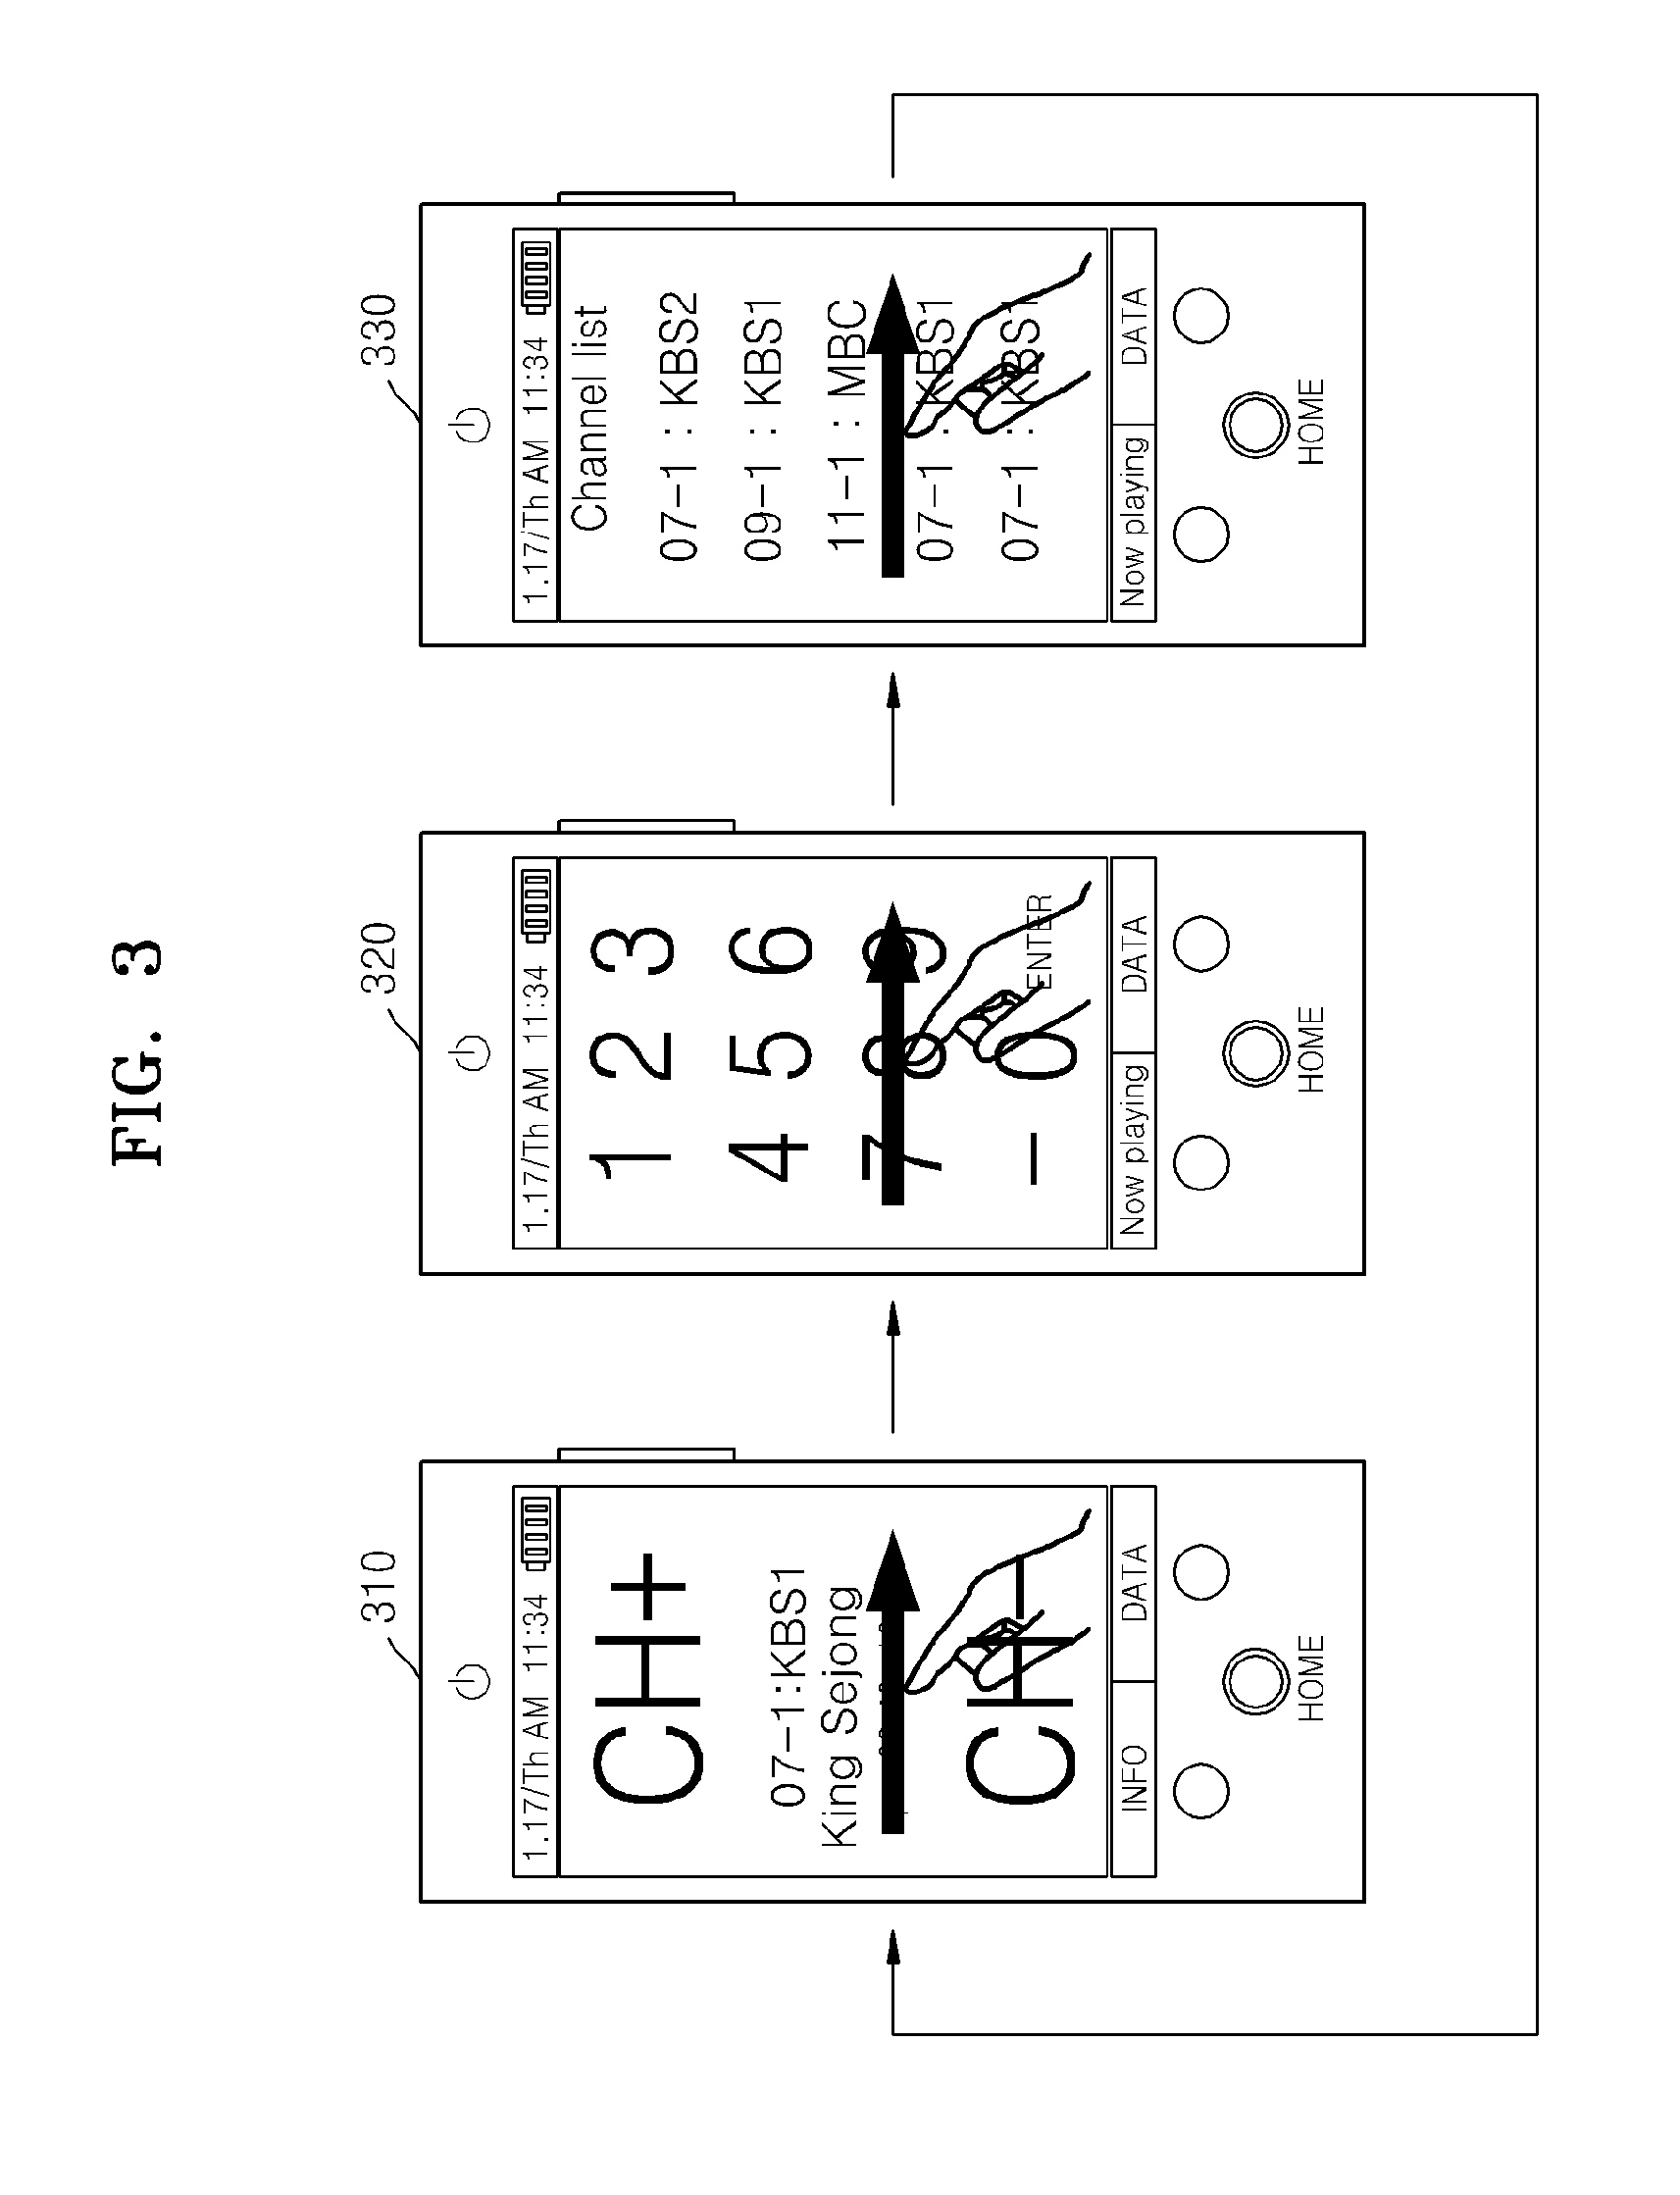 Remote control device and method of controlling other devices using the same